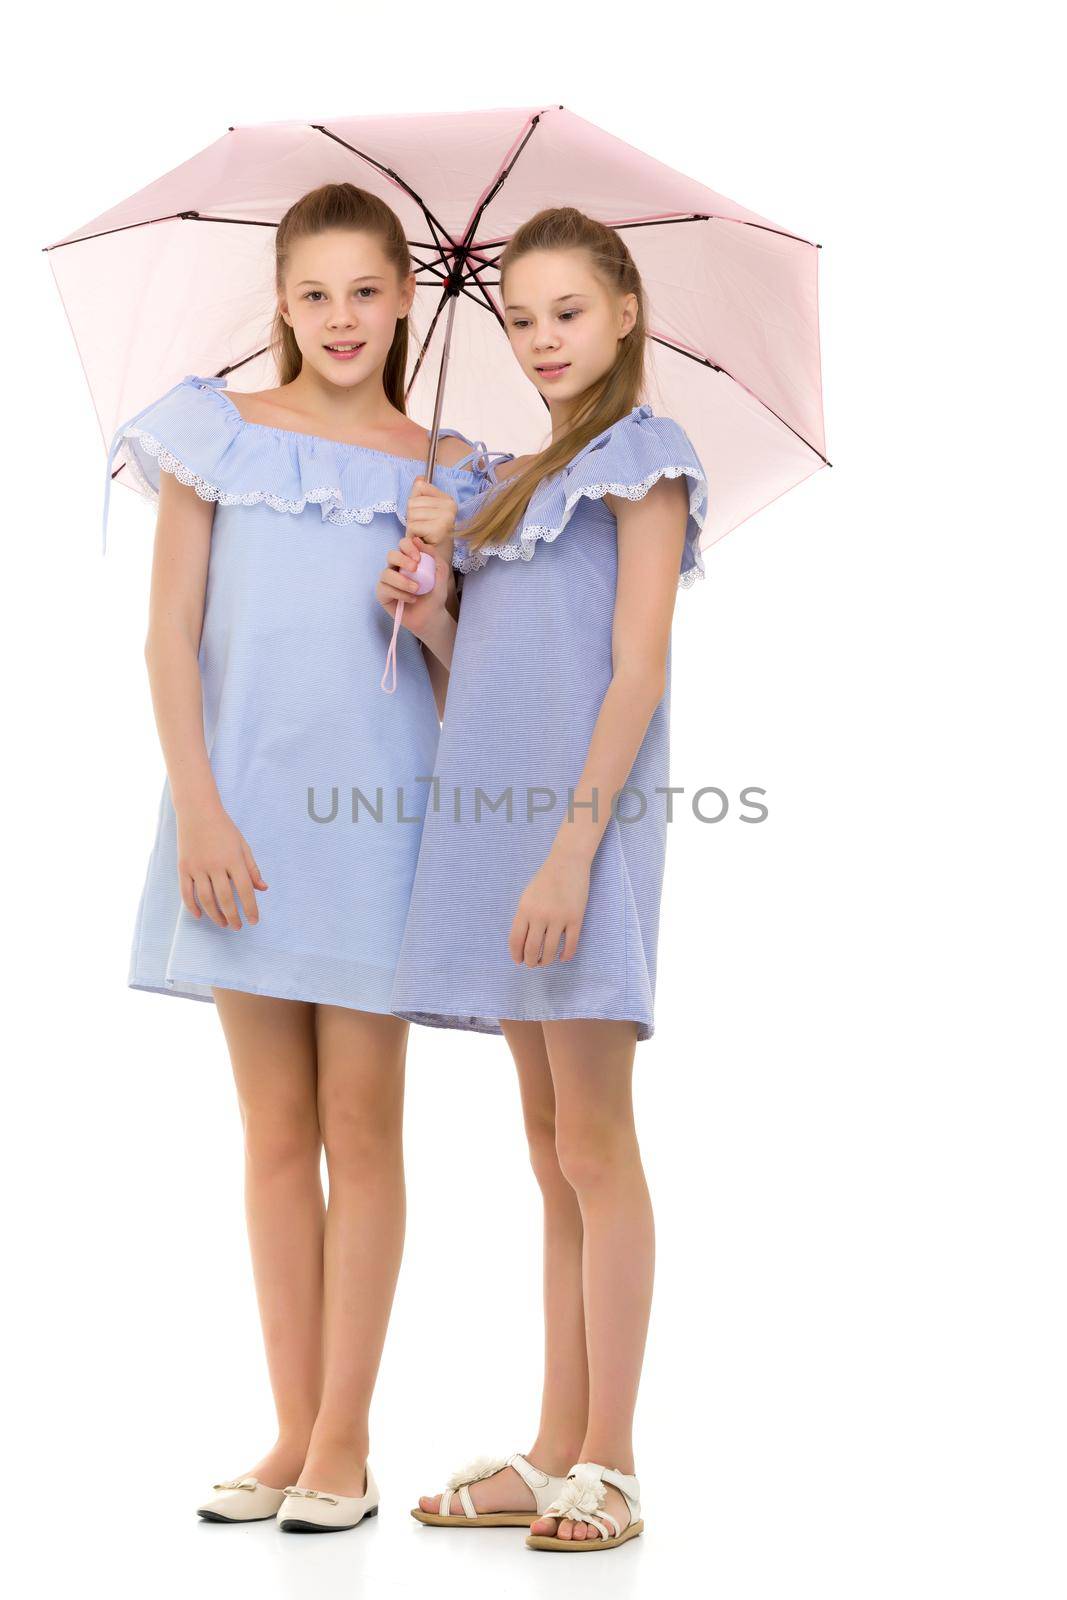 Two Cheerful Pretty Sisters in Identical Light Blue Dresses Standing Under Pink Umbrella, Beautiful Twin Girls in Fashionable Clothes Posing in Studio Against White Background